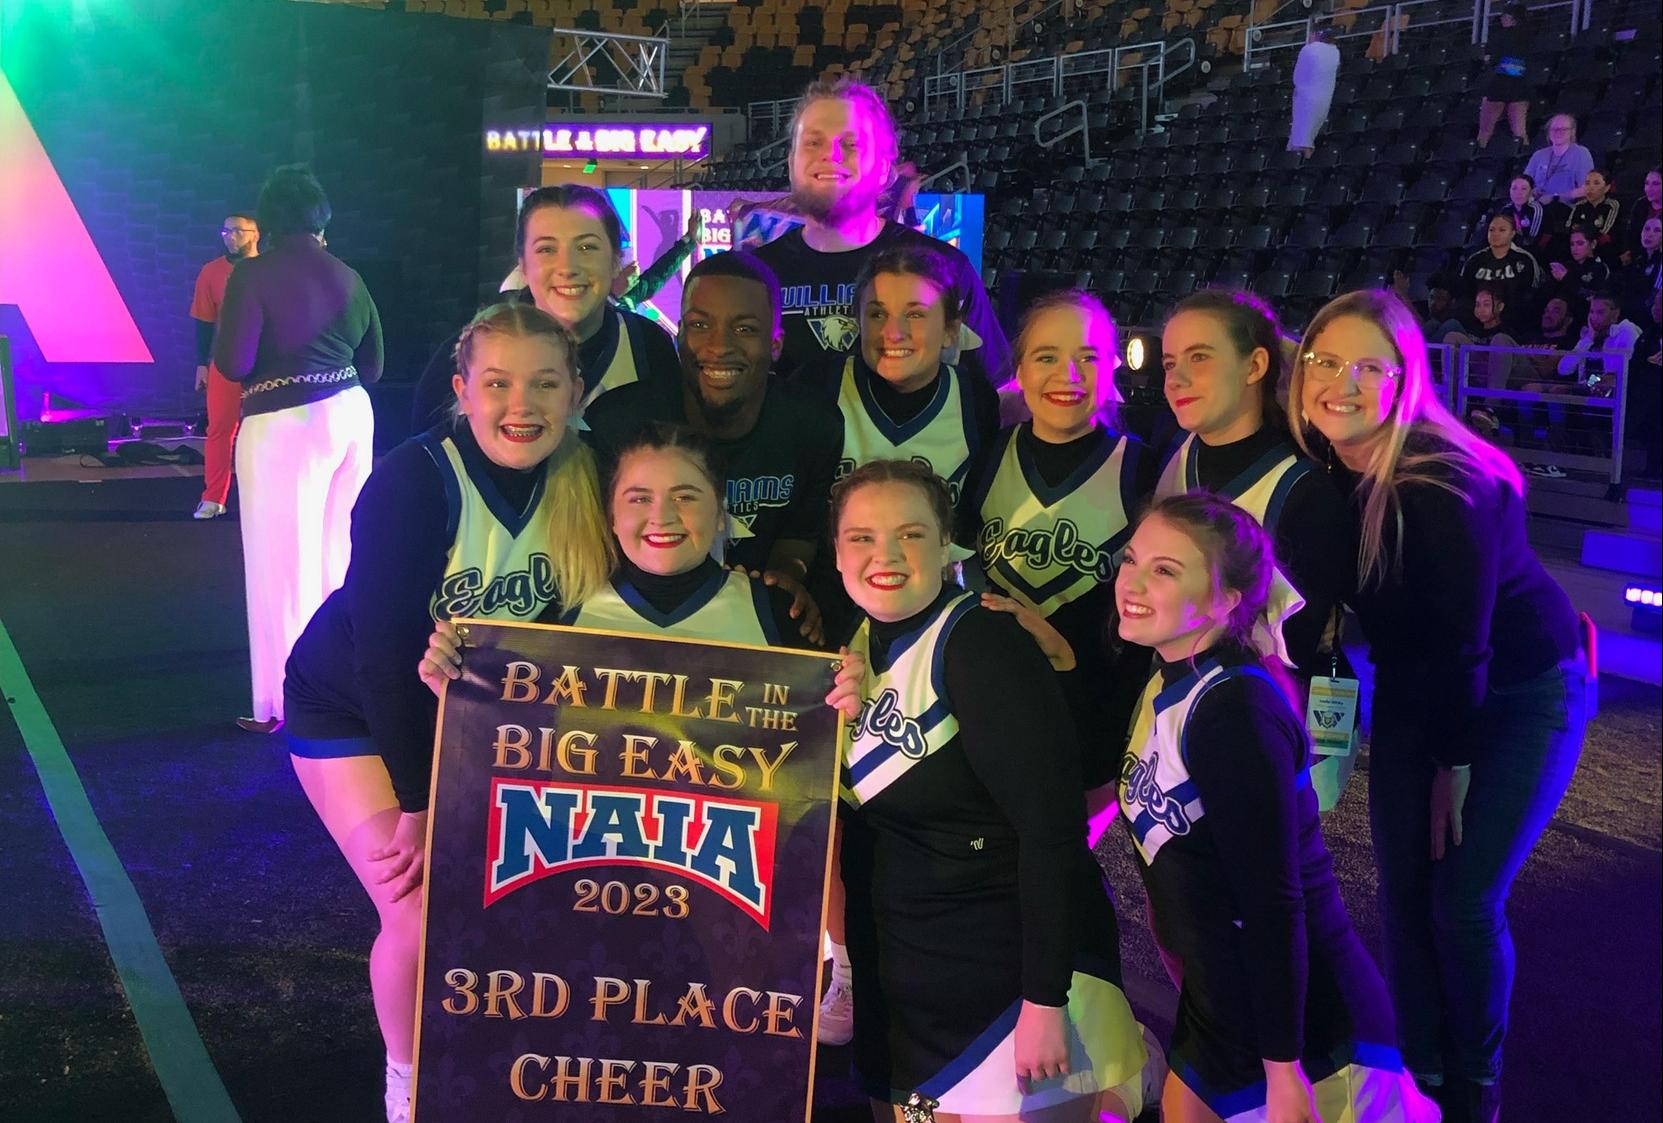 Eagles Cheer Finishes 3rd at Battle in the Big Easy